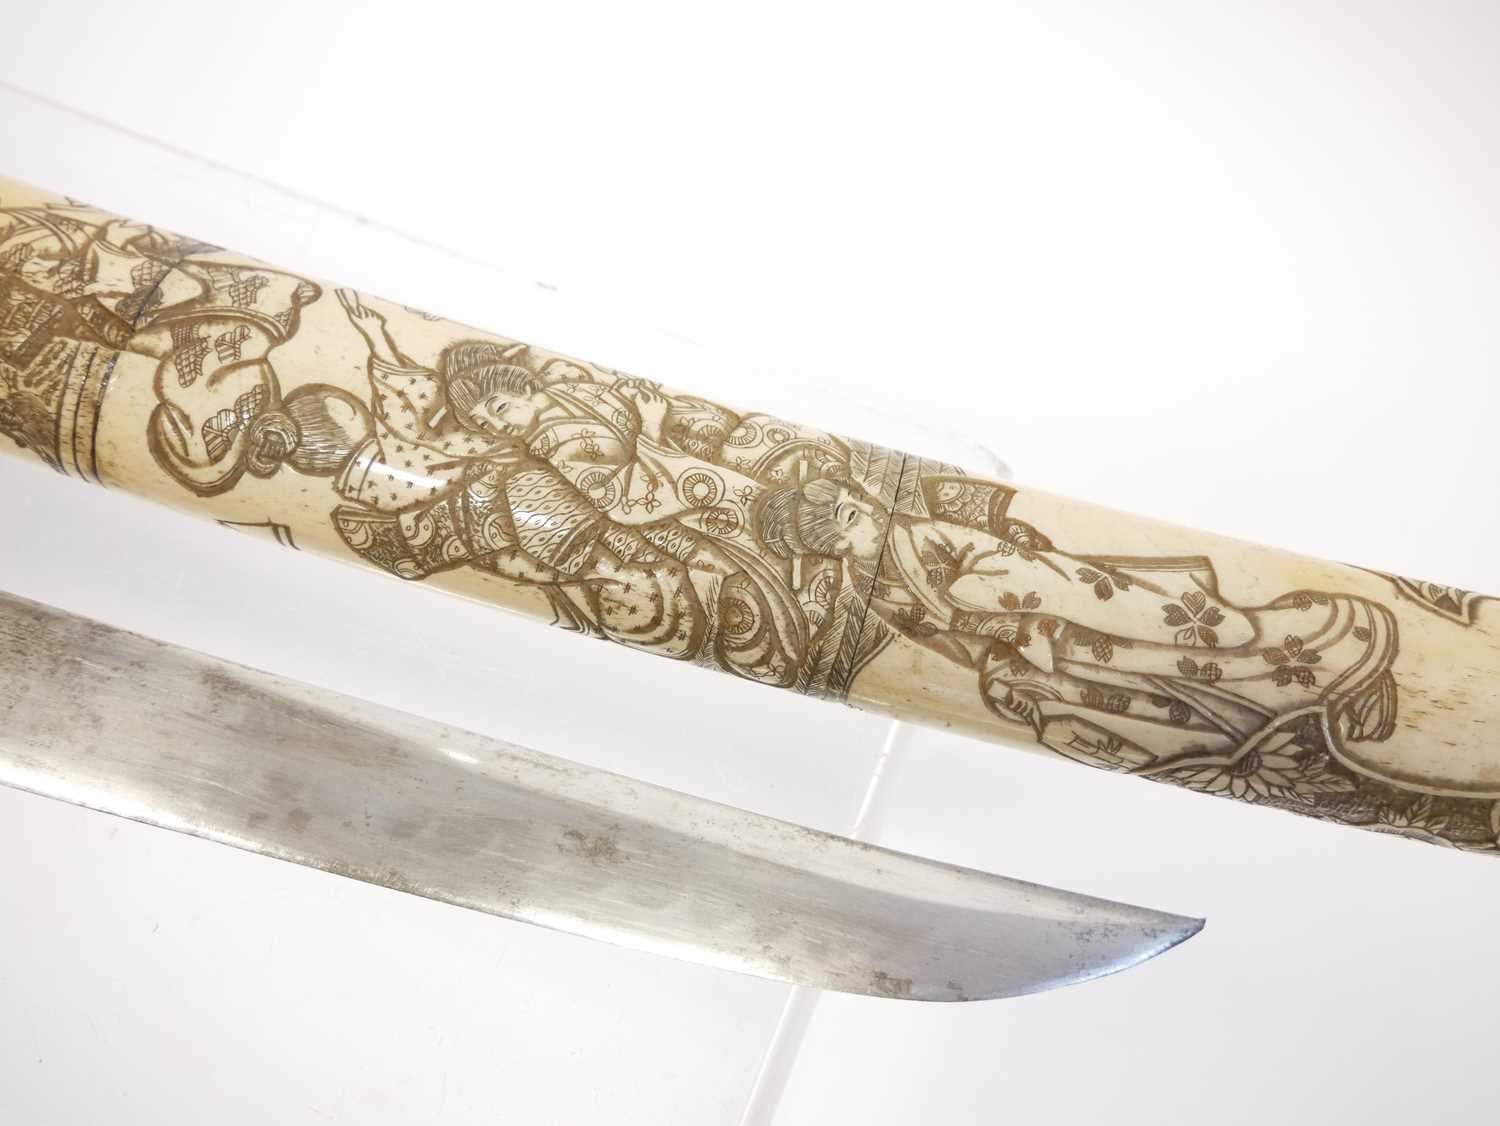 Japanese bone mounted tanto dagger, slightly curved 11inch cutting edge blade, the mounts carved and - Image 5 of 14